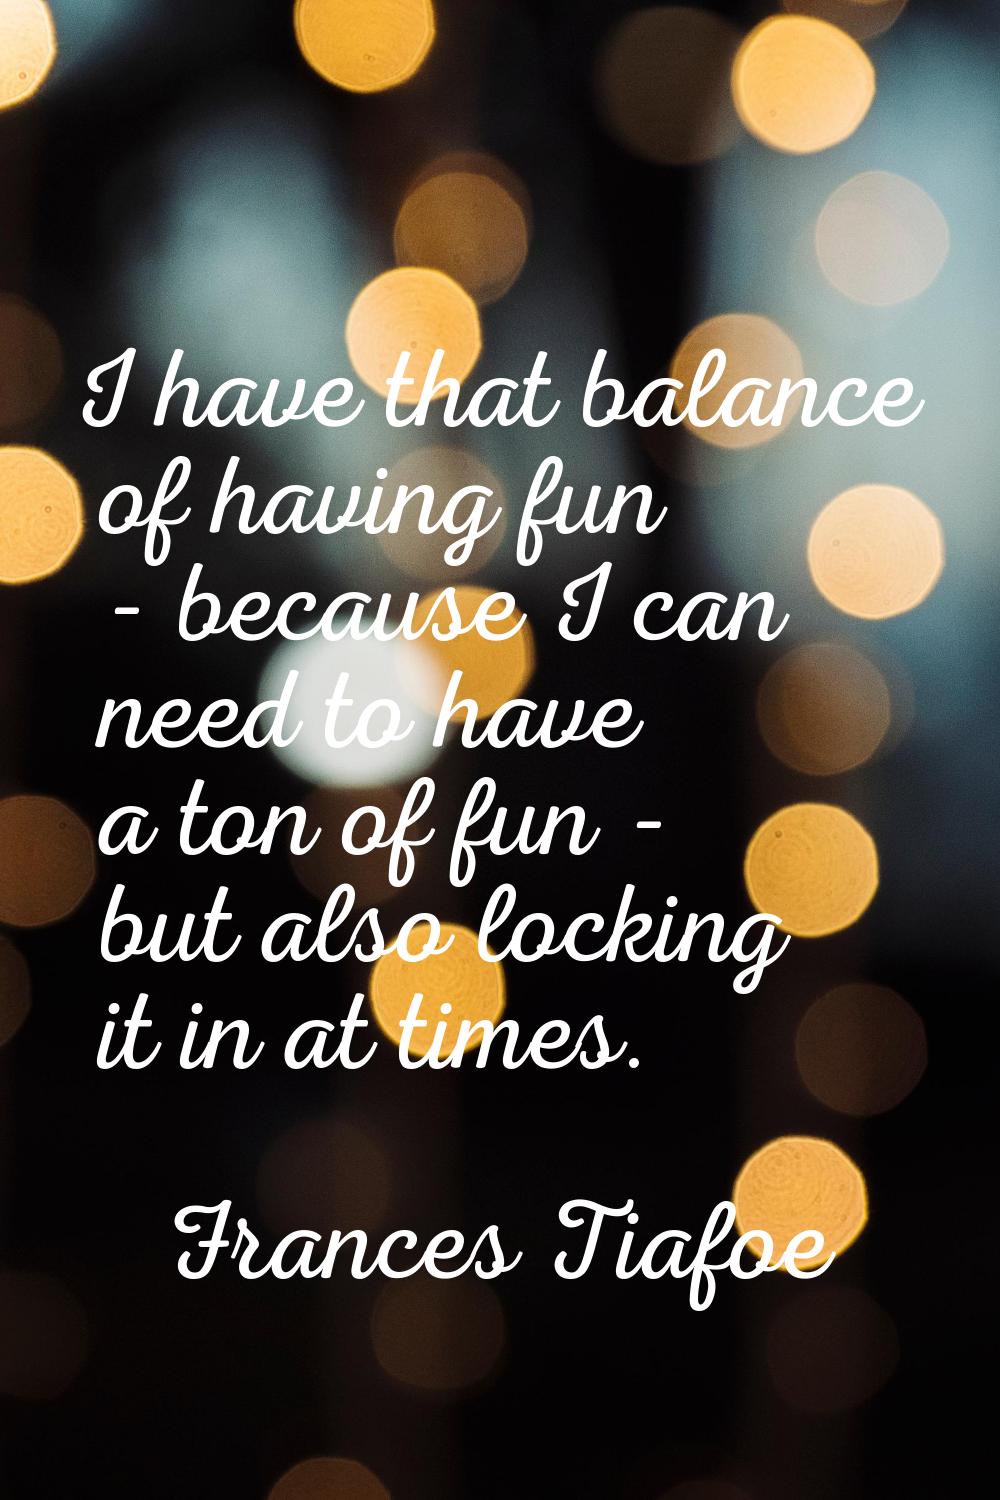 I have that balance of having fun - because I can need to have a ton of fun - but also locking it i